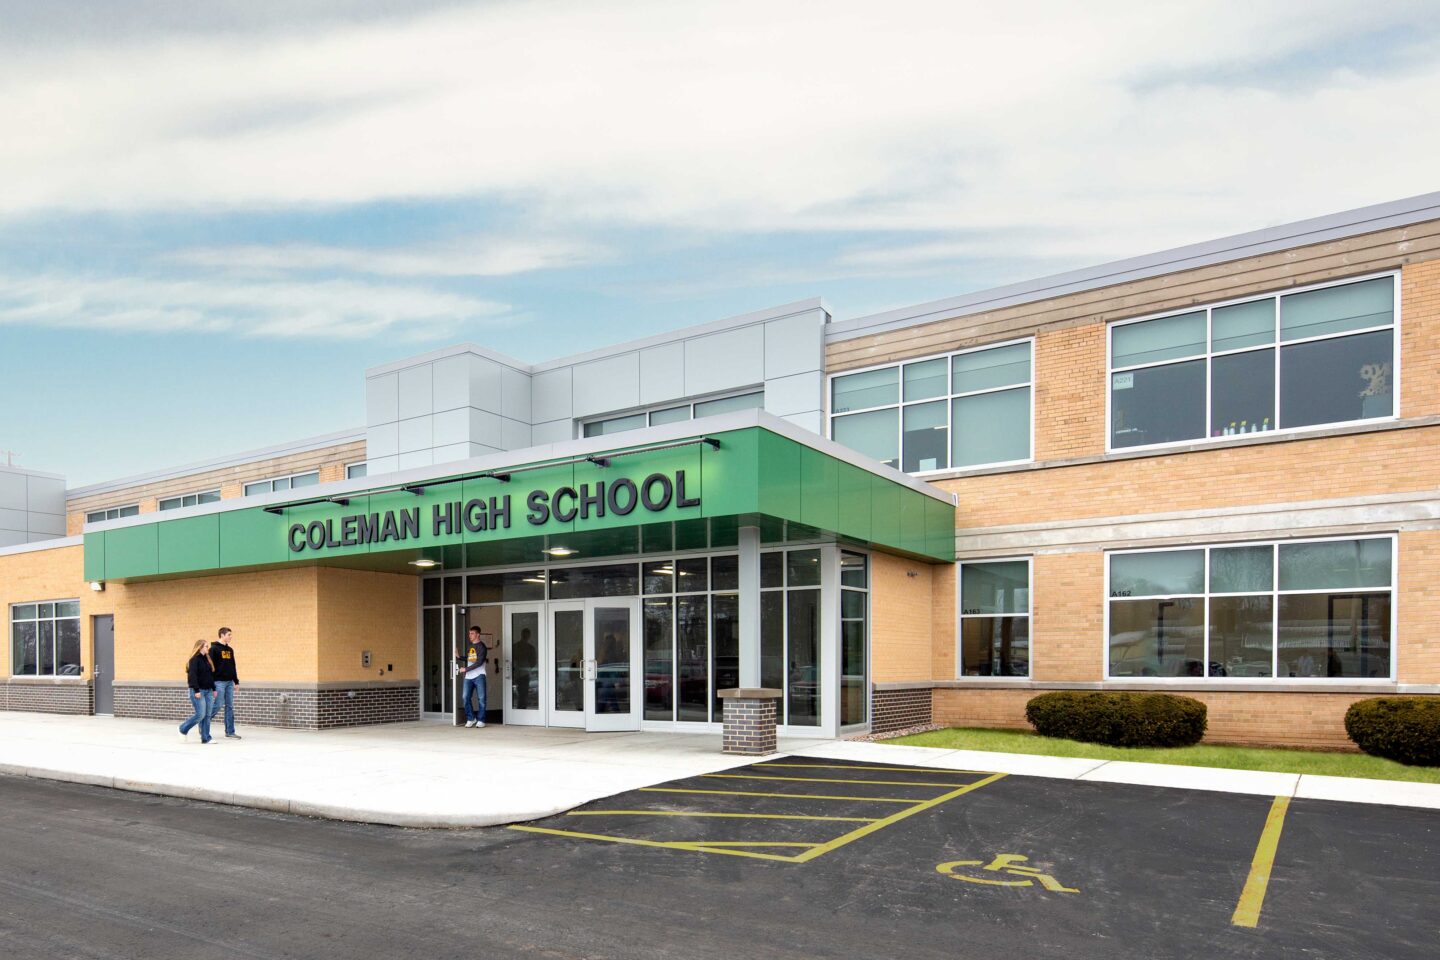 Exterior view of the updated entrance to Coleman High School, which bumps out from the existing building and is accented by school colors